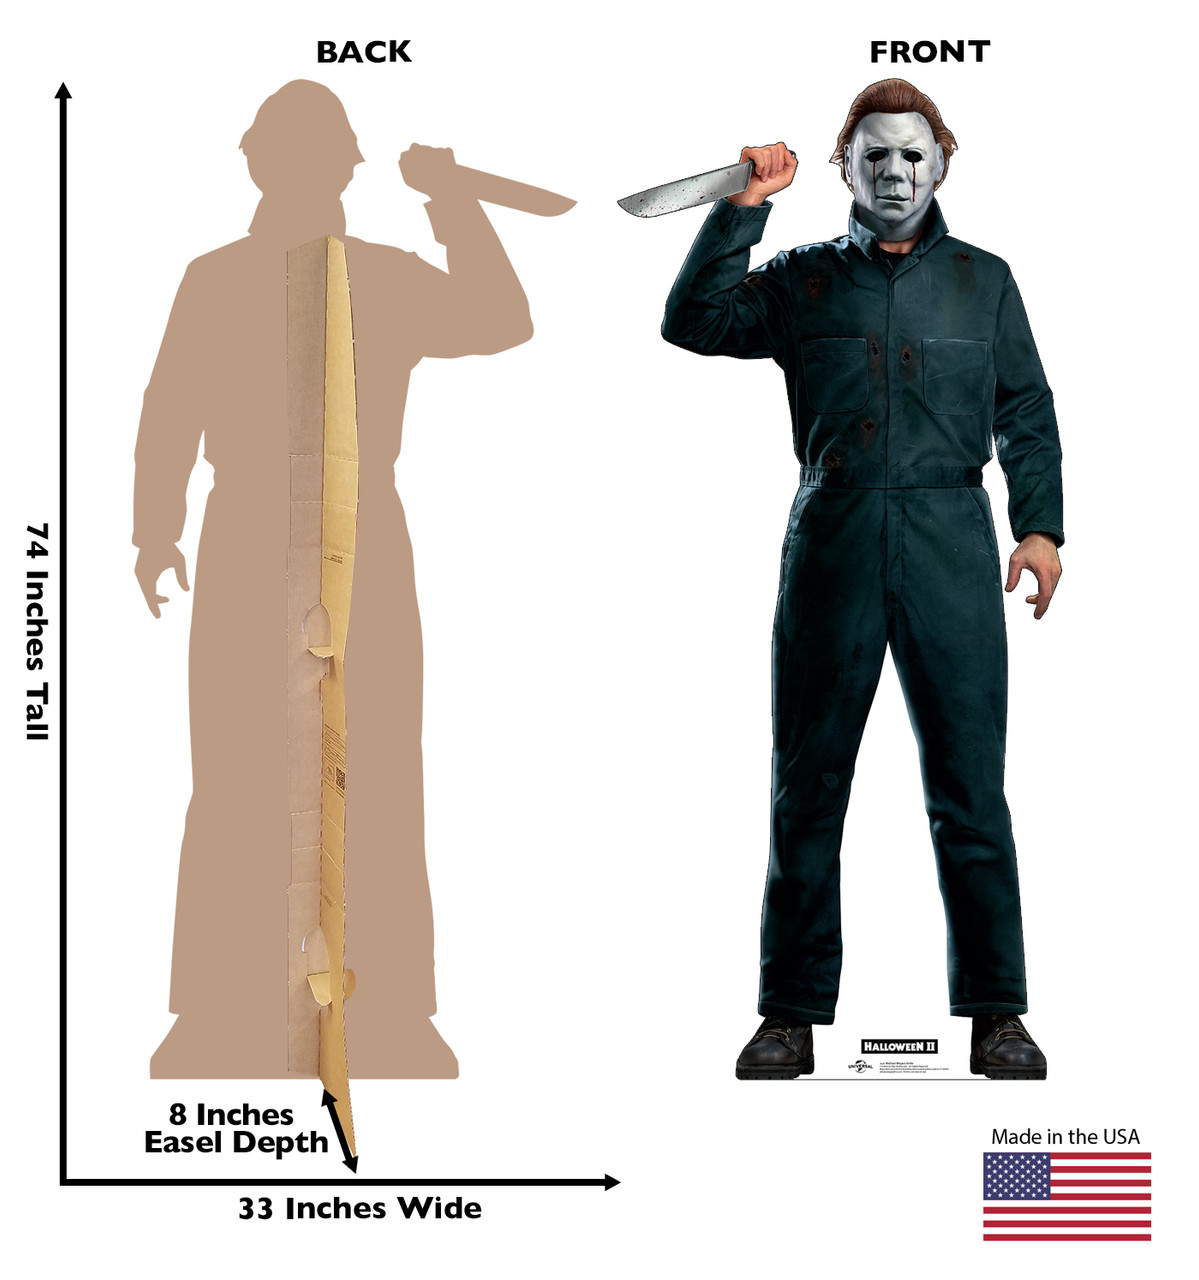 How Tall is Michael Myers